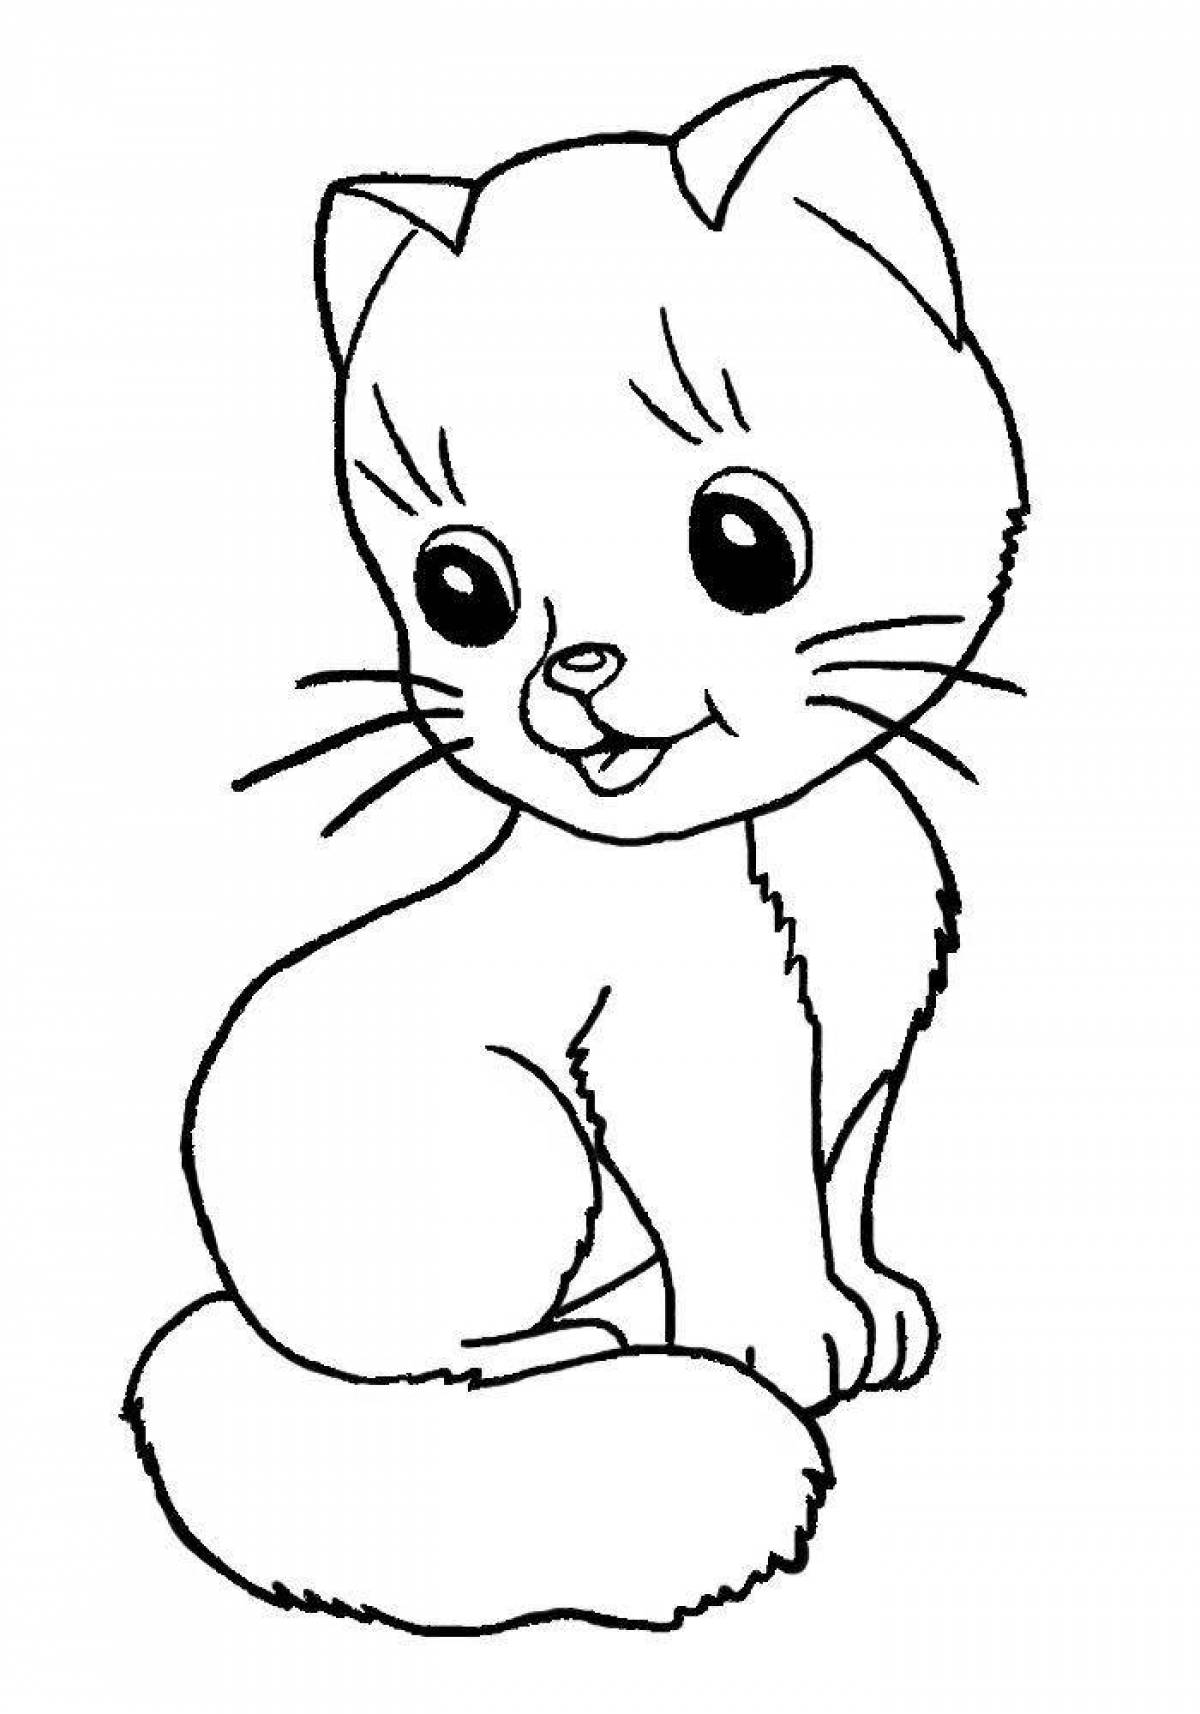 Live coloring kitty for children 4-5 years old